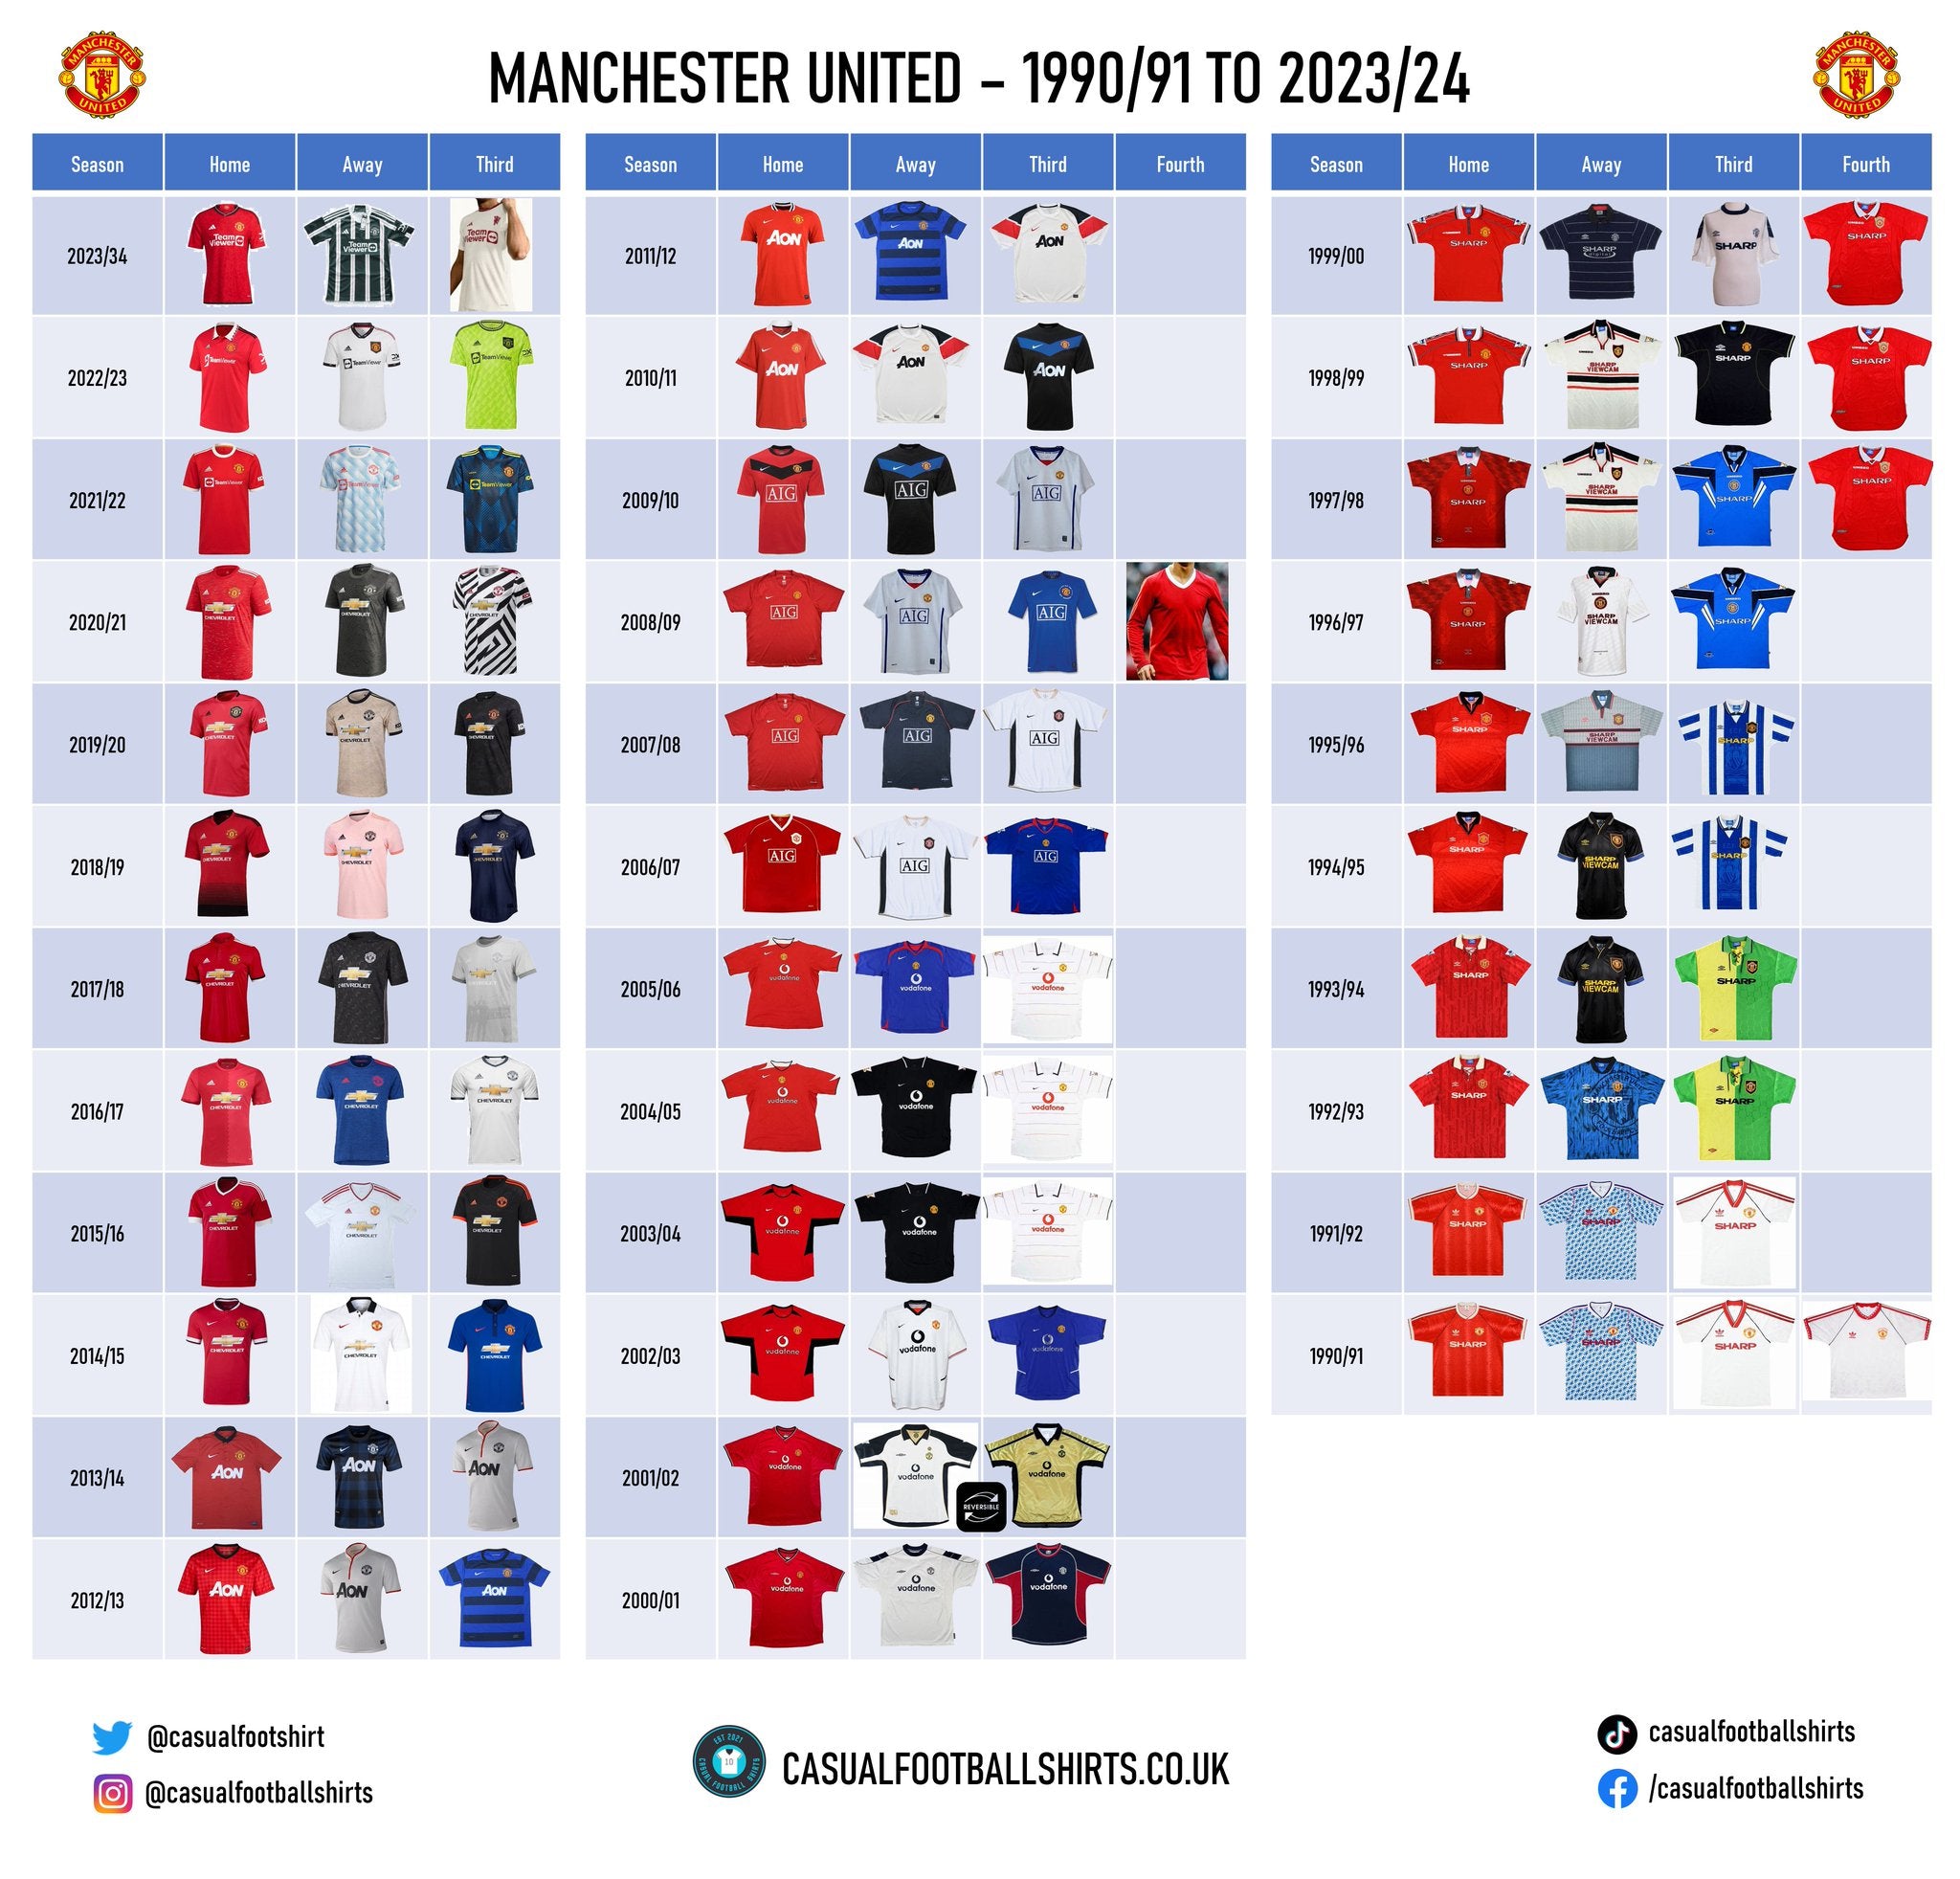 Downloadable Manchester United Shirt History - 1990 to modern day